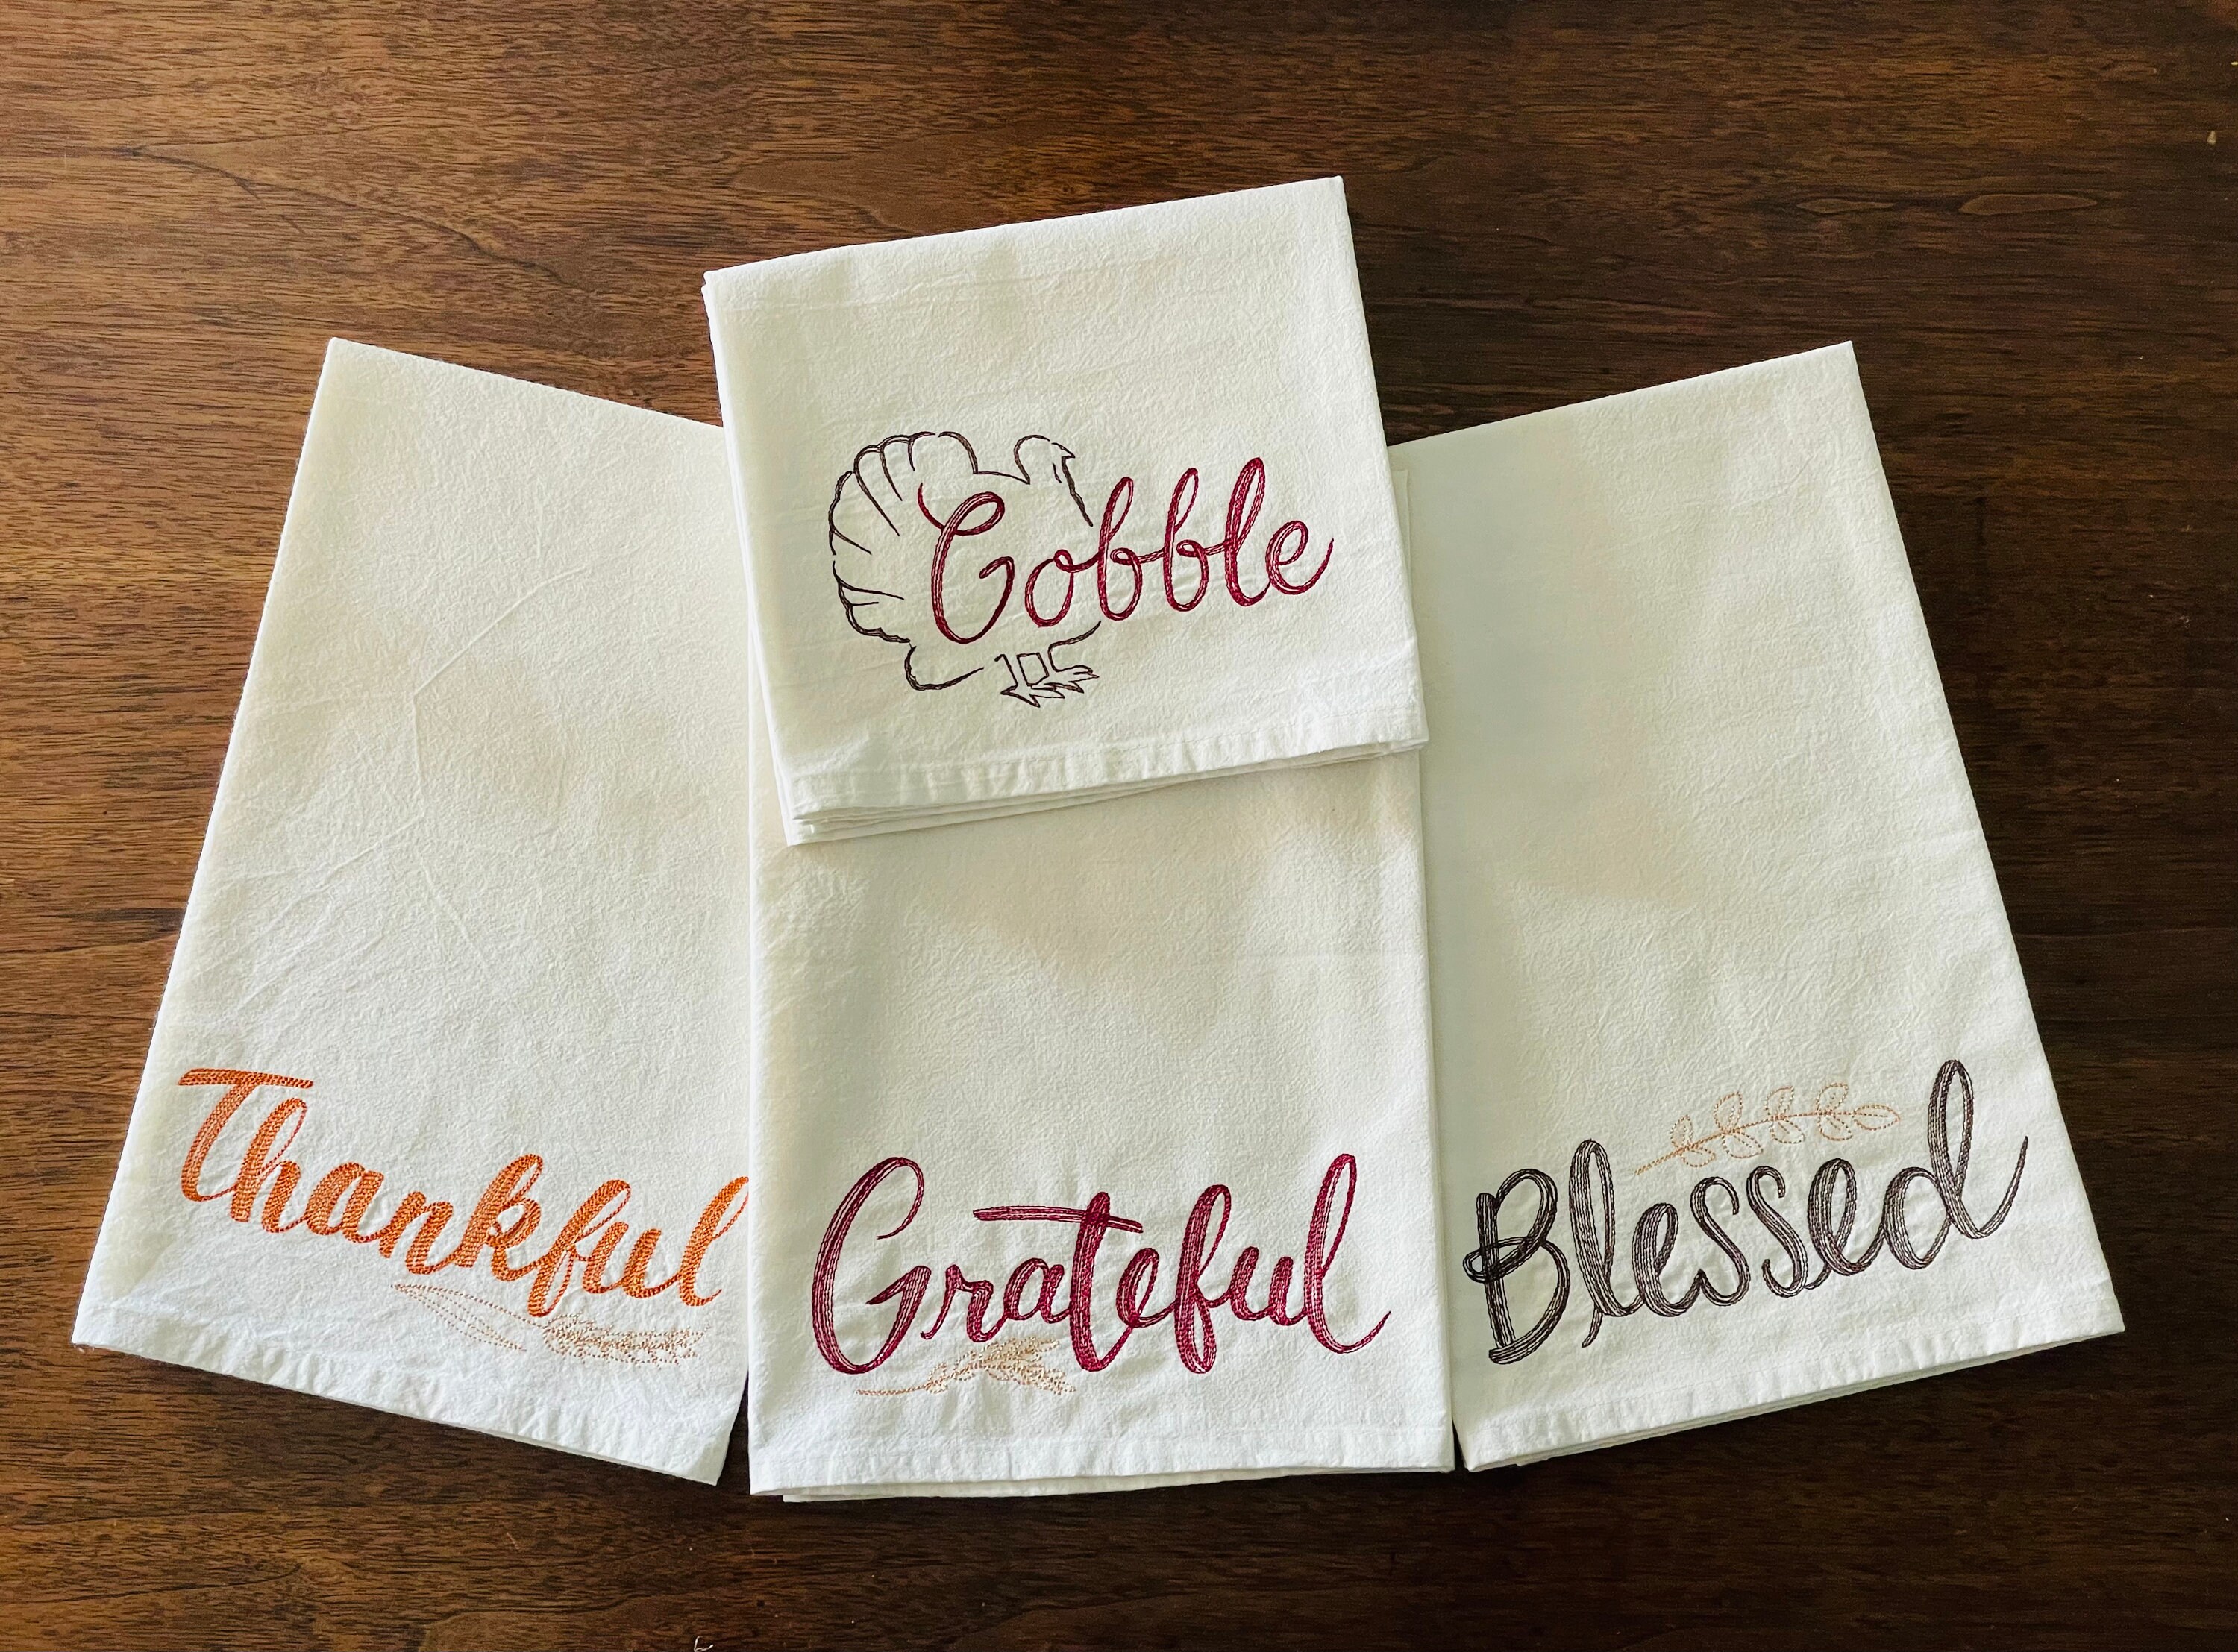  fillURbasket Cute Kitchen Towels Set, Fun Dish Towels with  Sayings Faith, Blessed, Family, Love, Home & Dreams Theme, 5 Flour Sack  Towels for Dish Drying Decor 16x28 Cotton : Home 